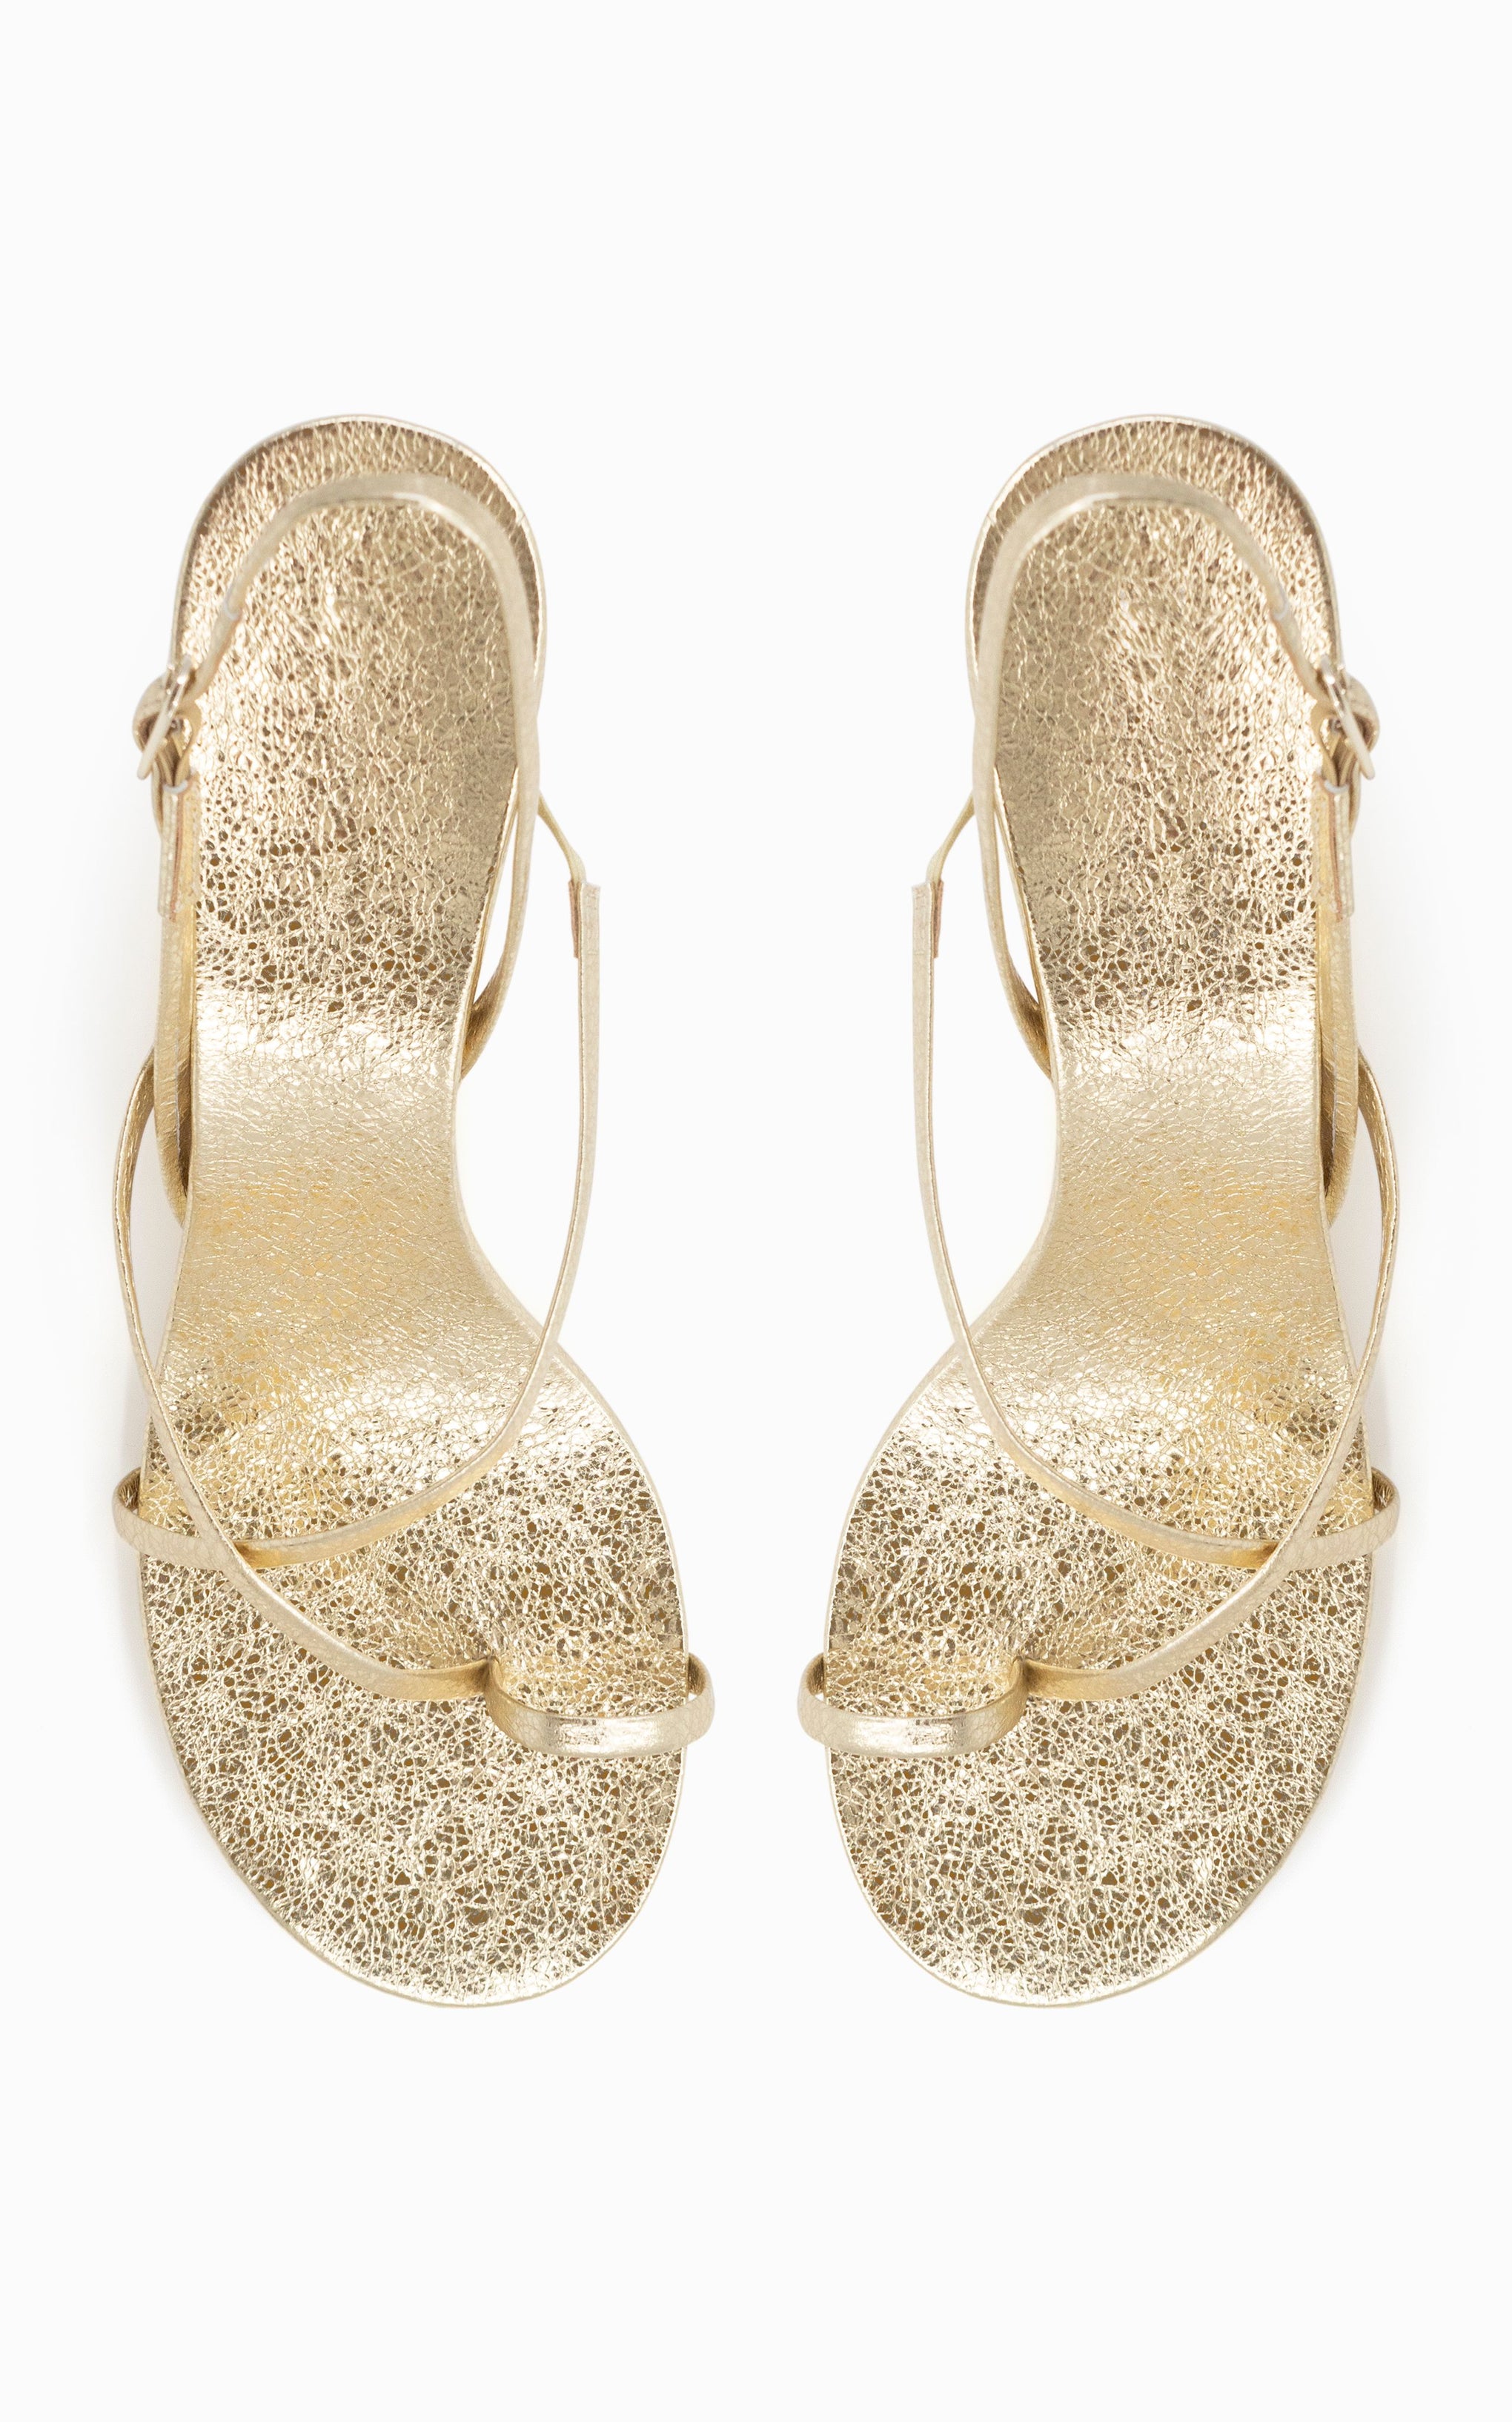 The Studio Amelia Agatha 70 Heel in Gold available at The New Trend Australia